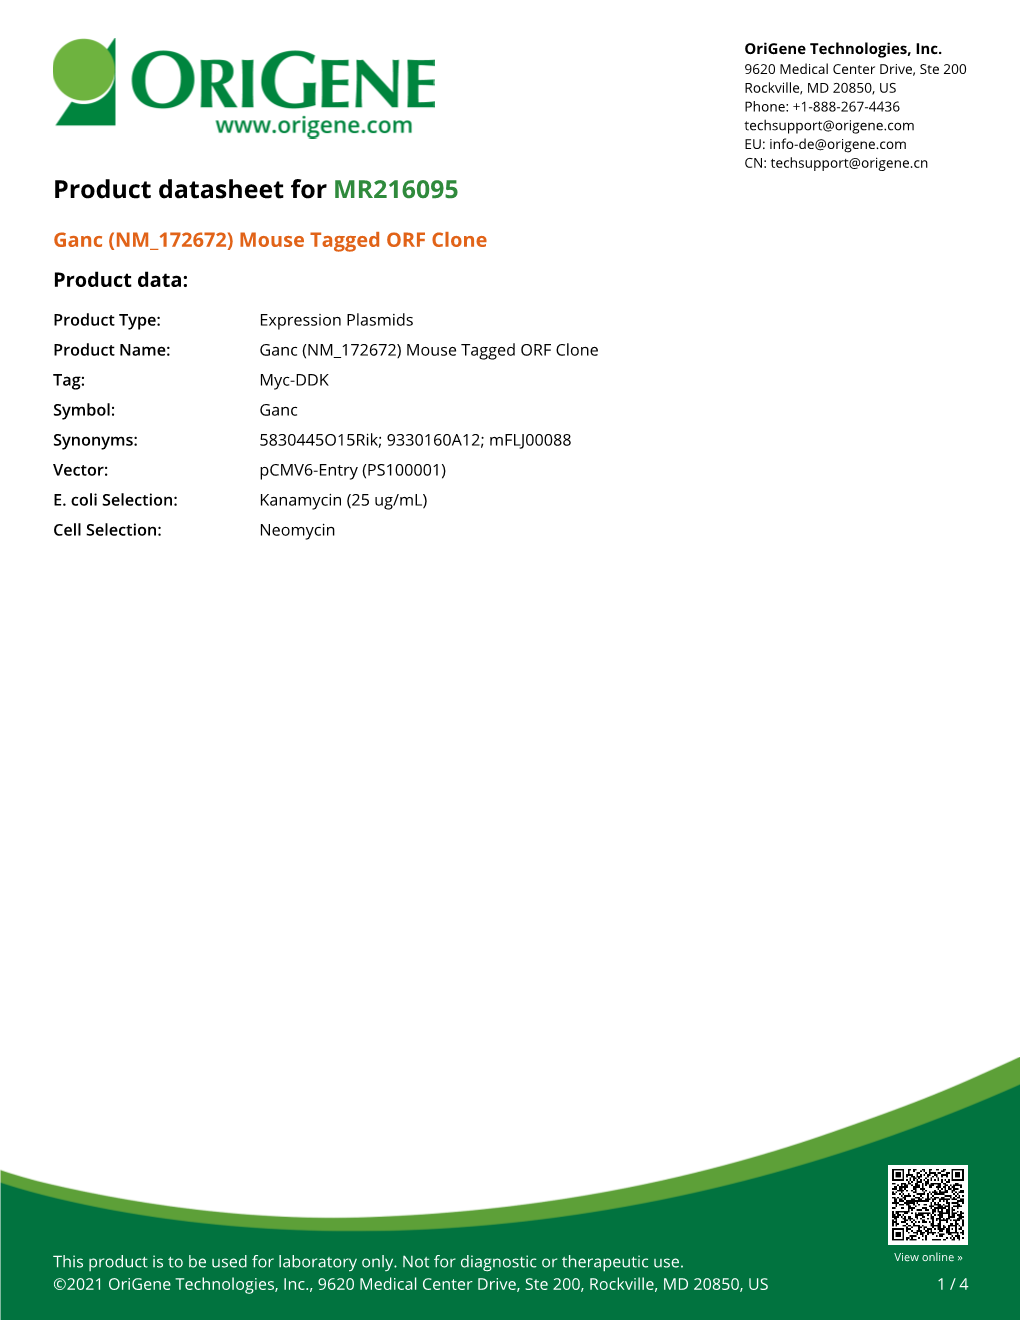 Ganc (NM 172672) Mouse Tagged ORF Clone Product Data